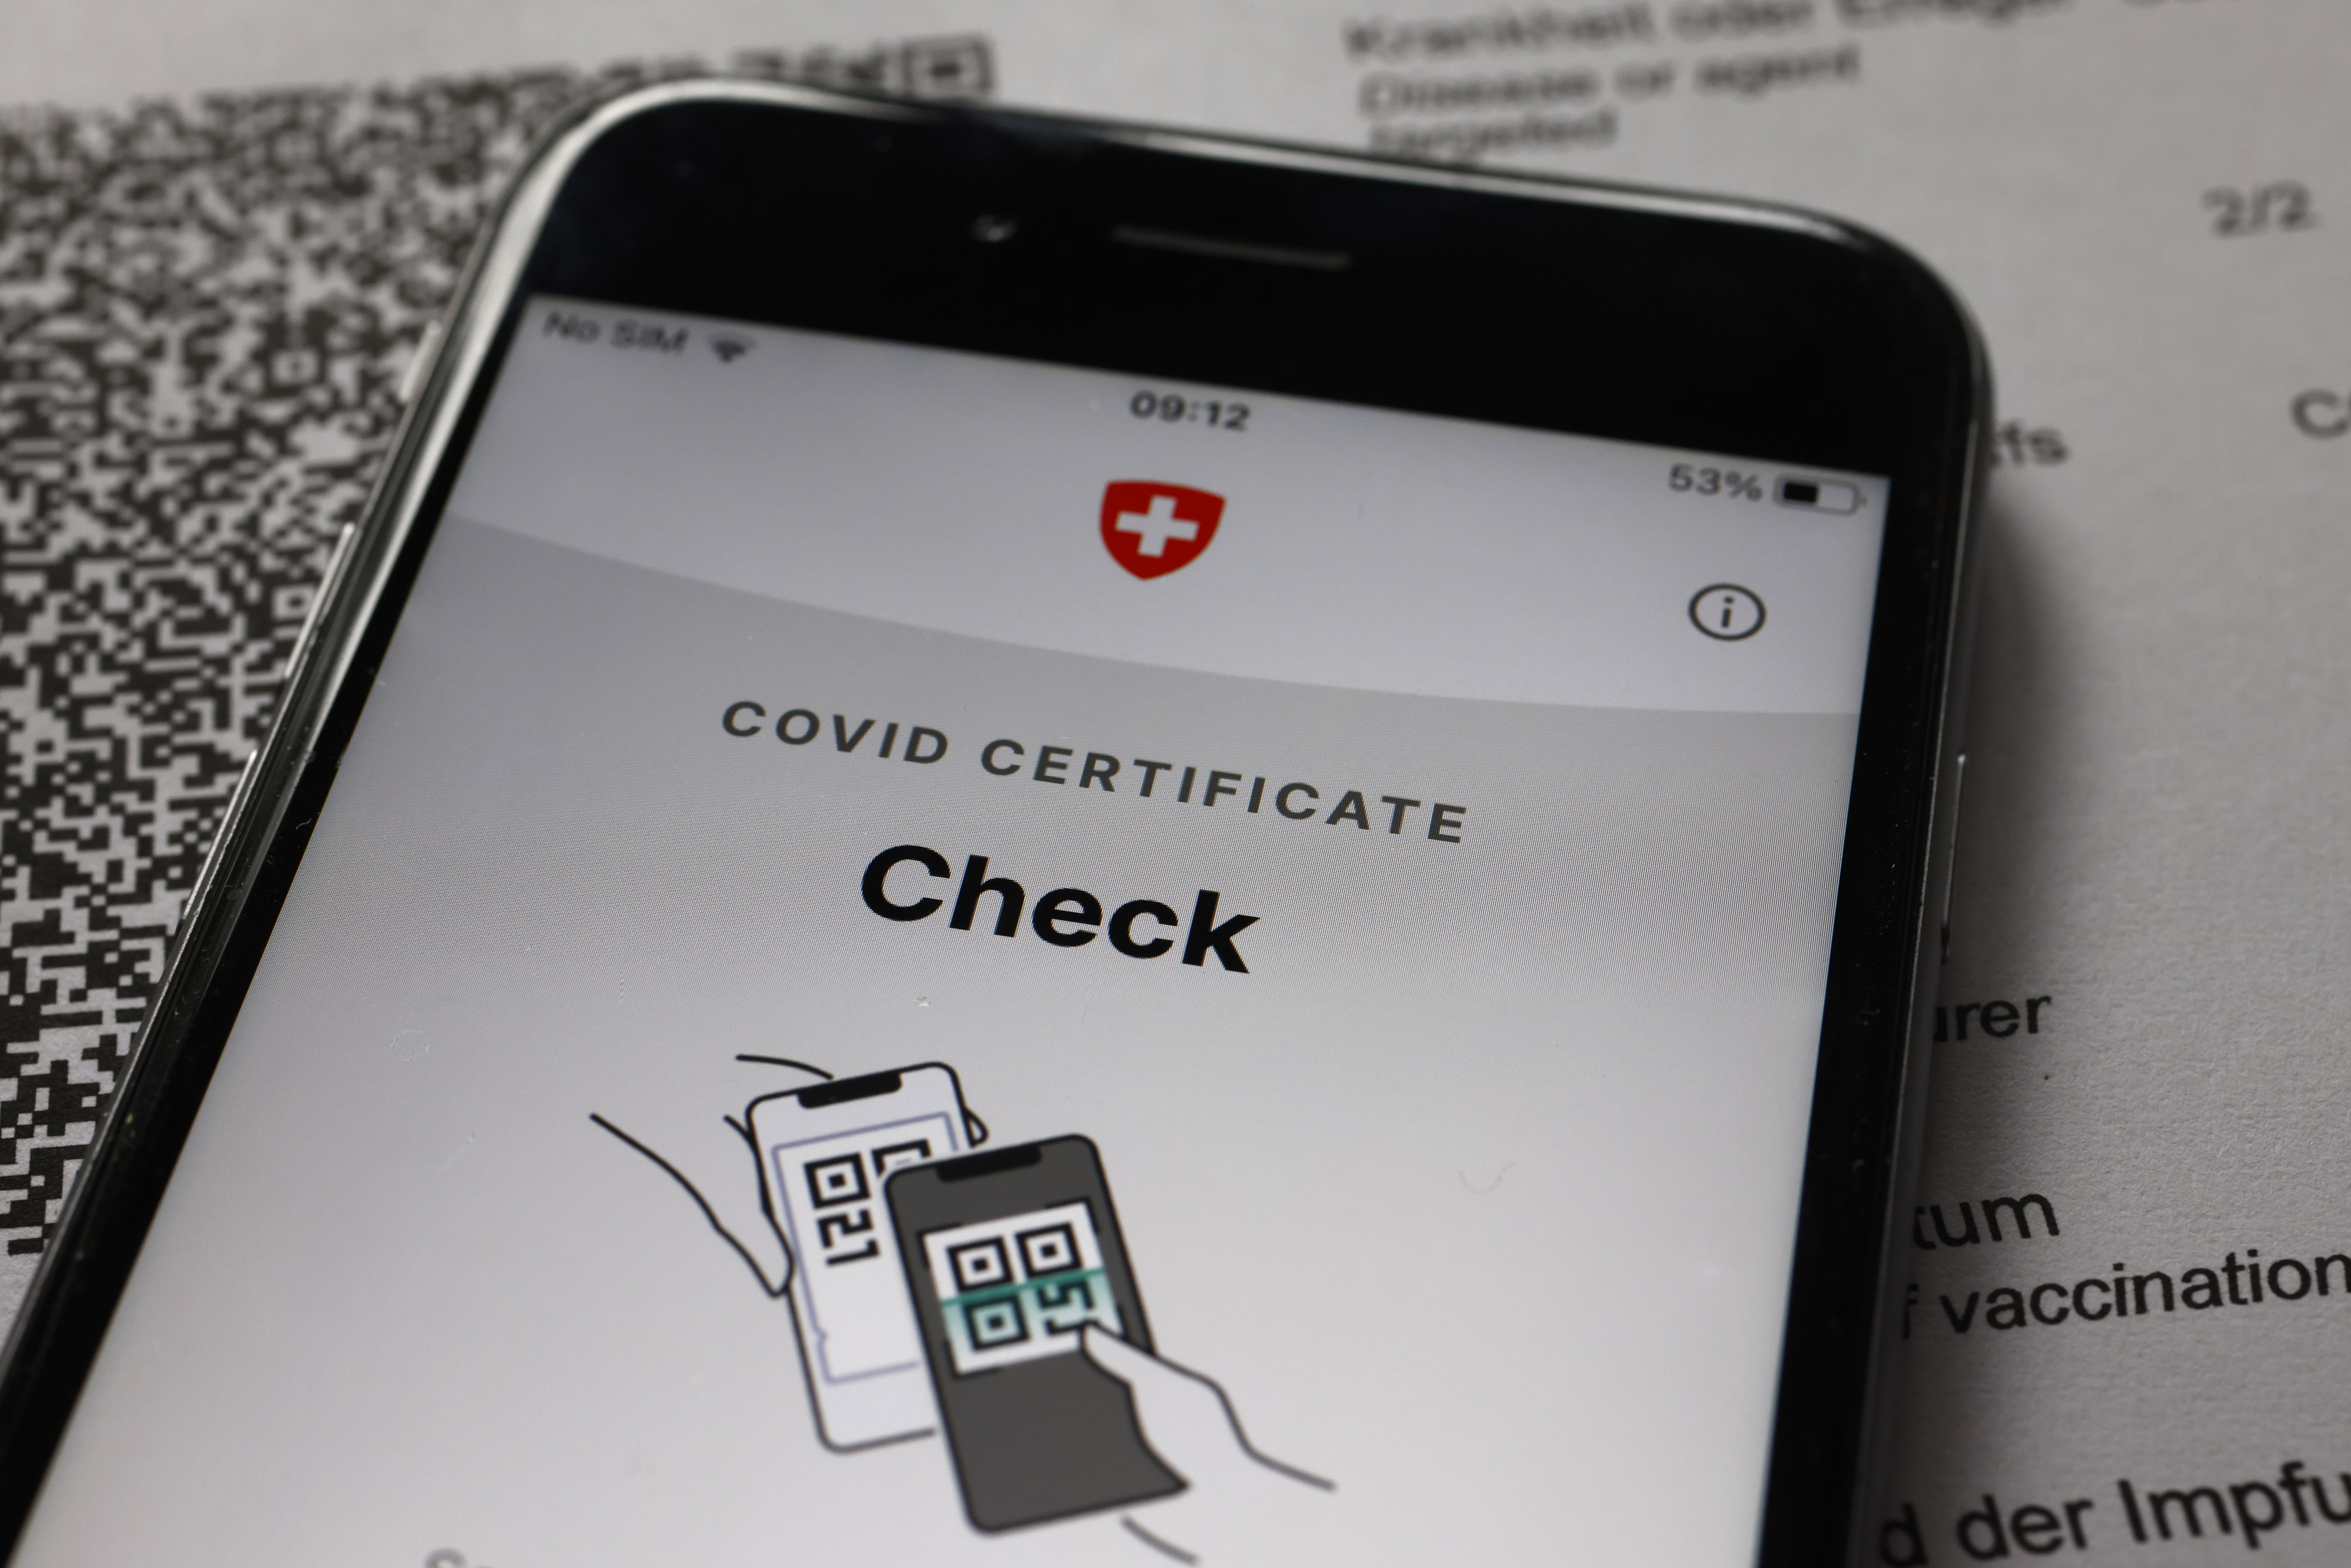 The Covid Certificate Check vaccination checking app on an Apple Inc. iPhone arranged in Bern, Switzerland, on Thursday, Sept. 16, 2021.